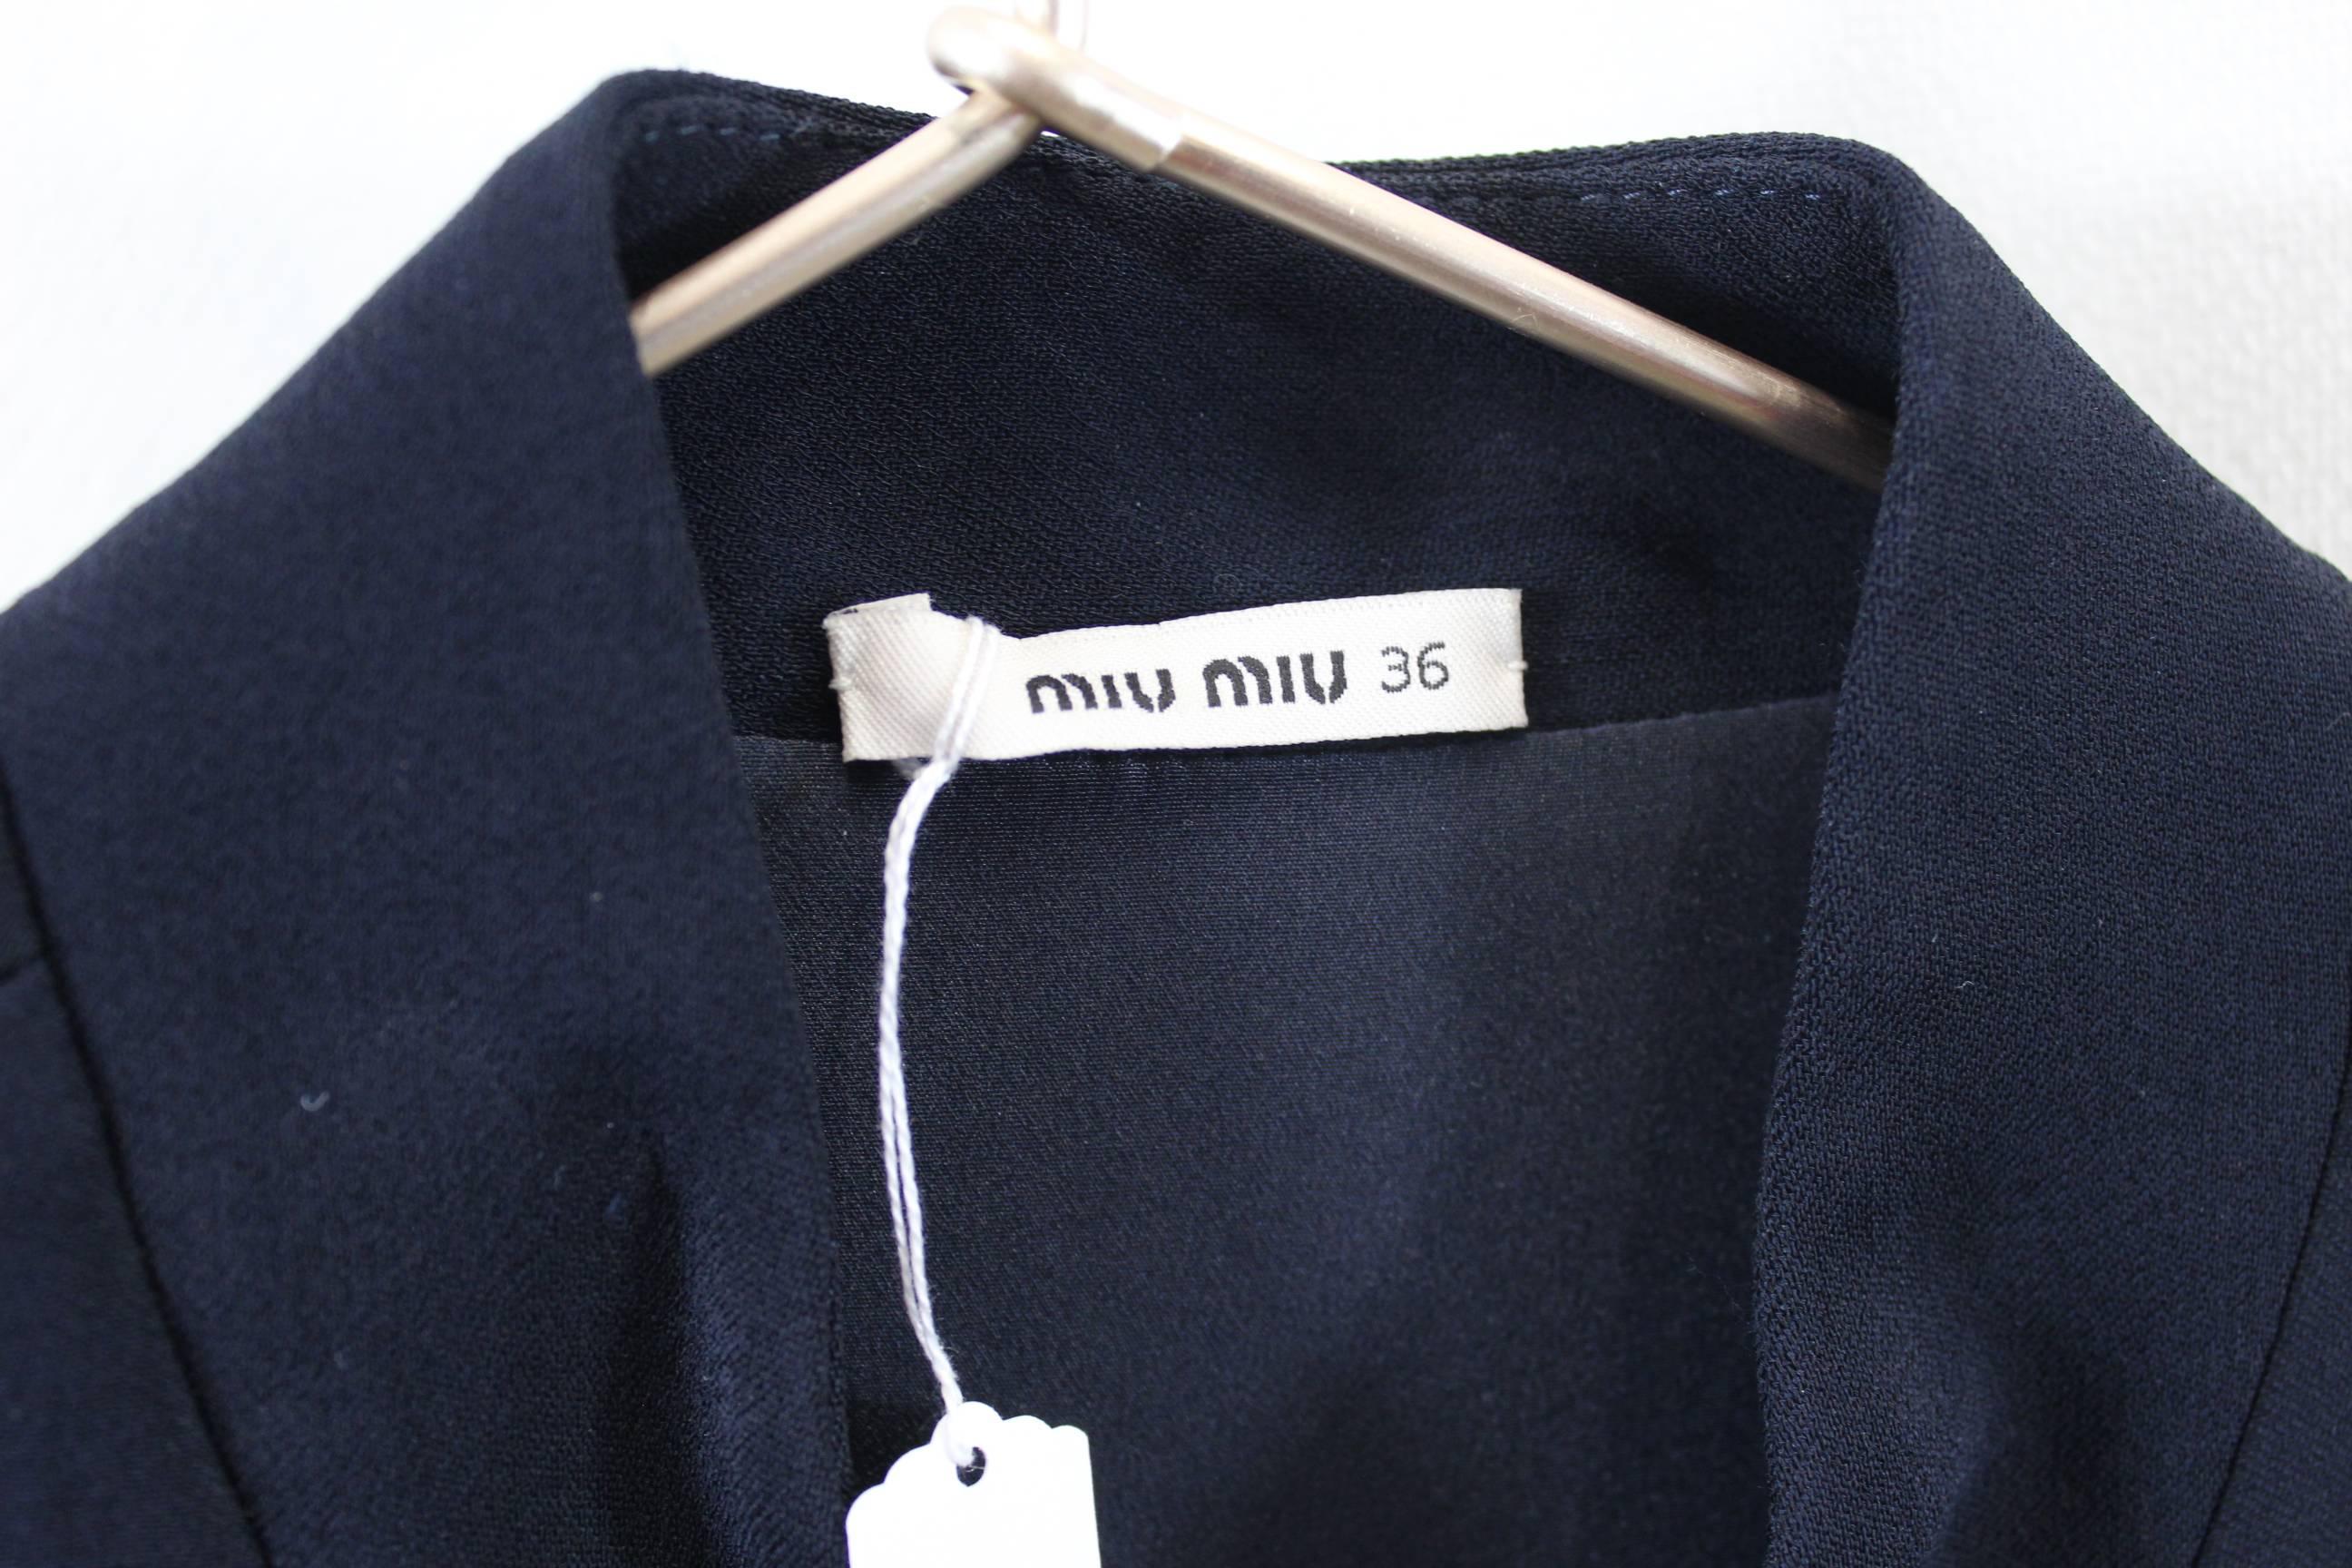 Women's Miu Miu Navy Day Dress in excellent condition. Retail Price 1300$. S 36 For Sale